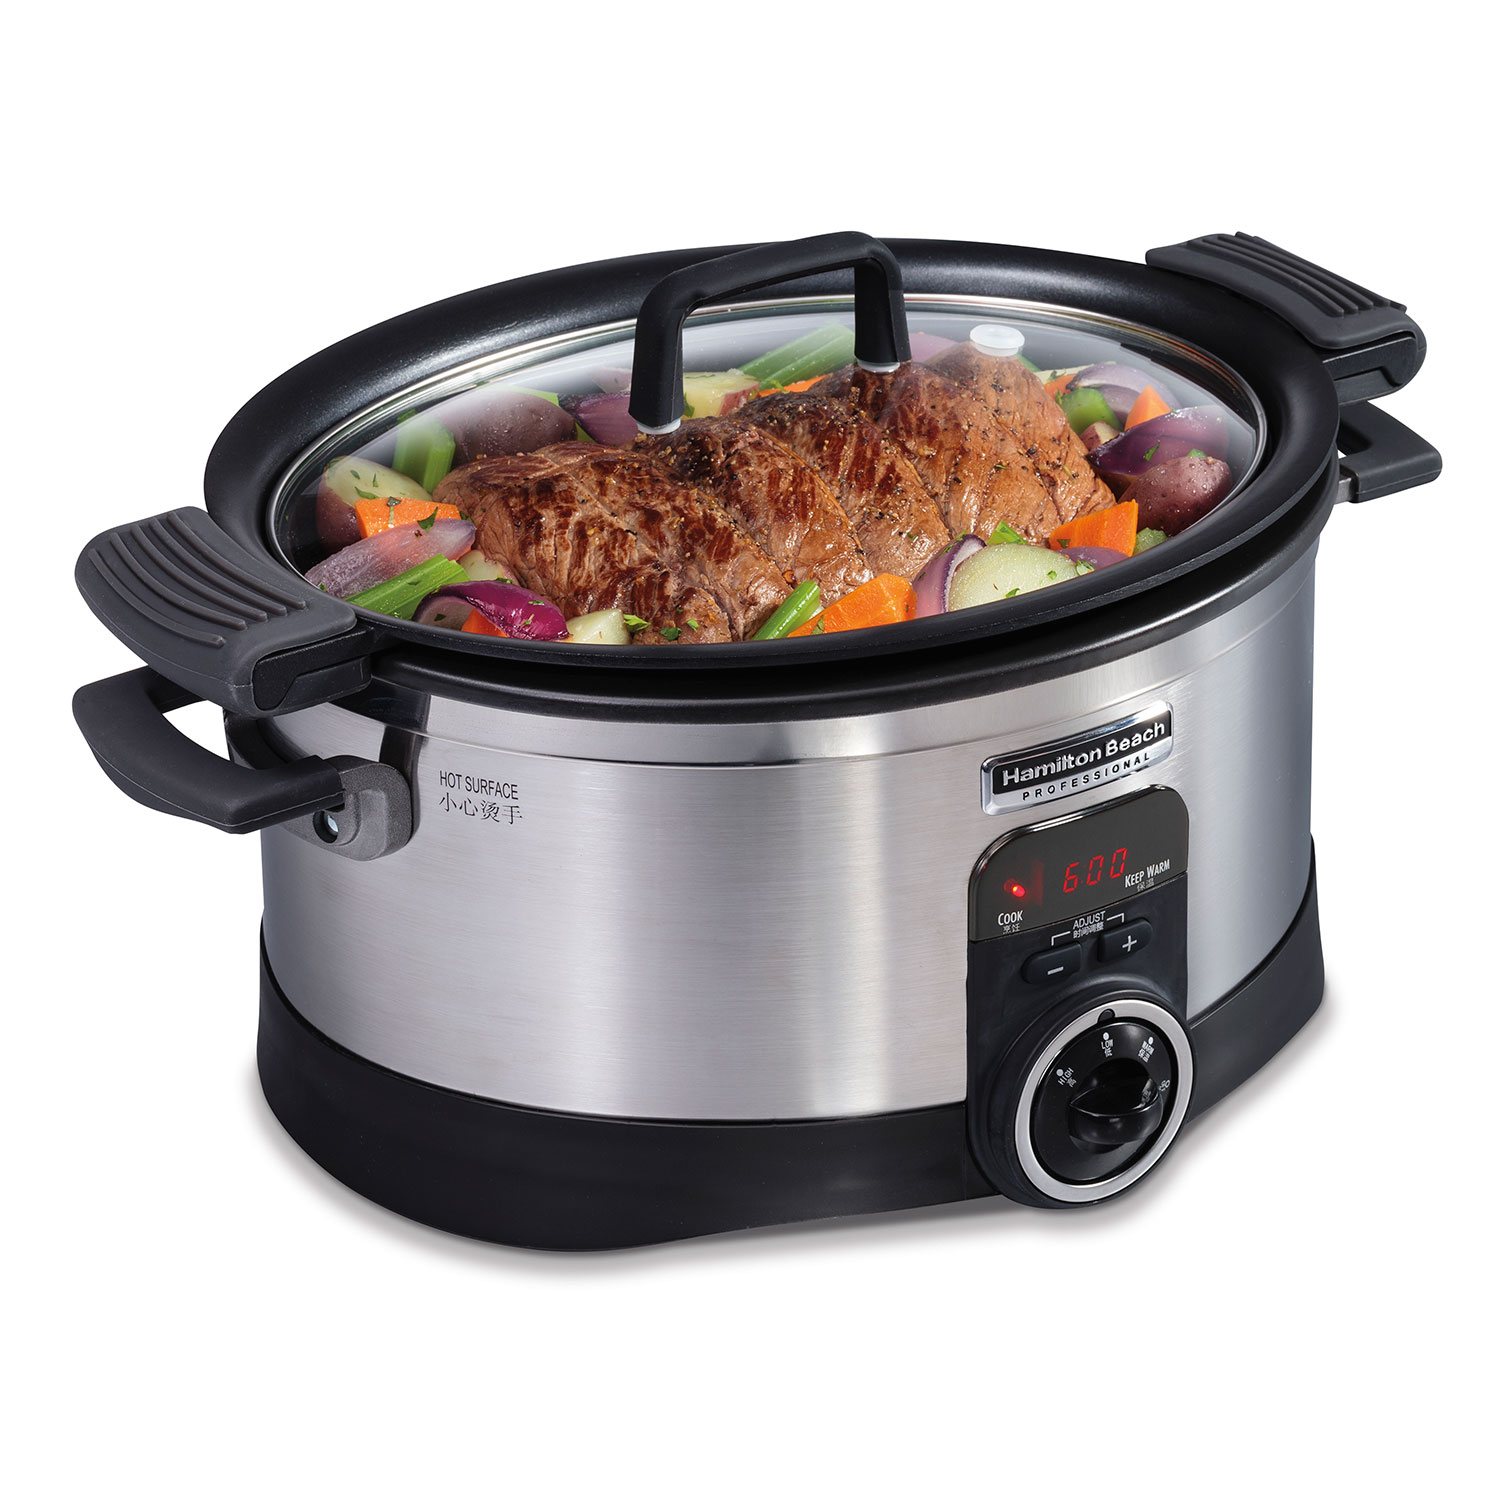 Stovetop Programmable Slow Cooker